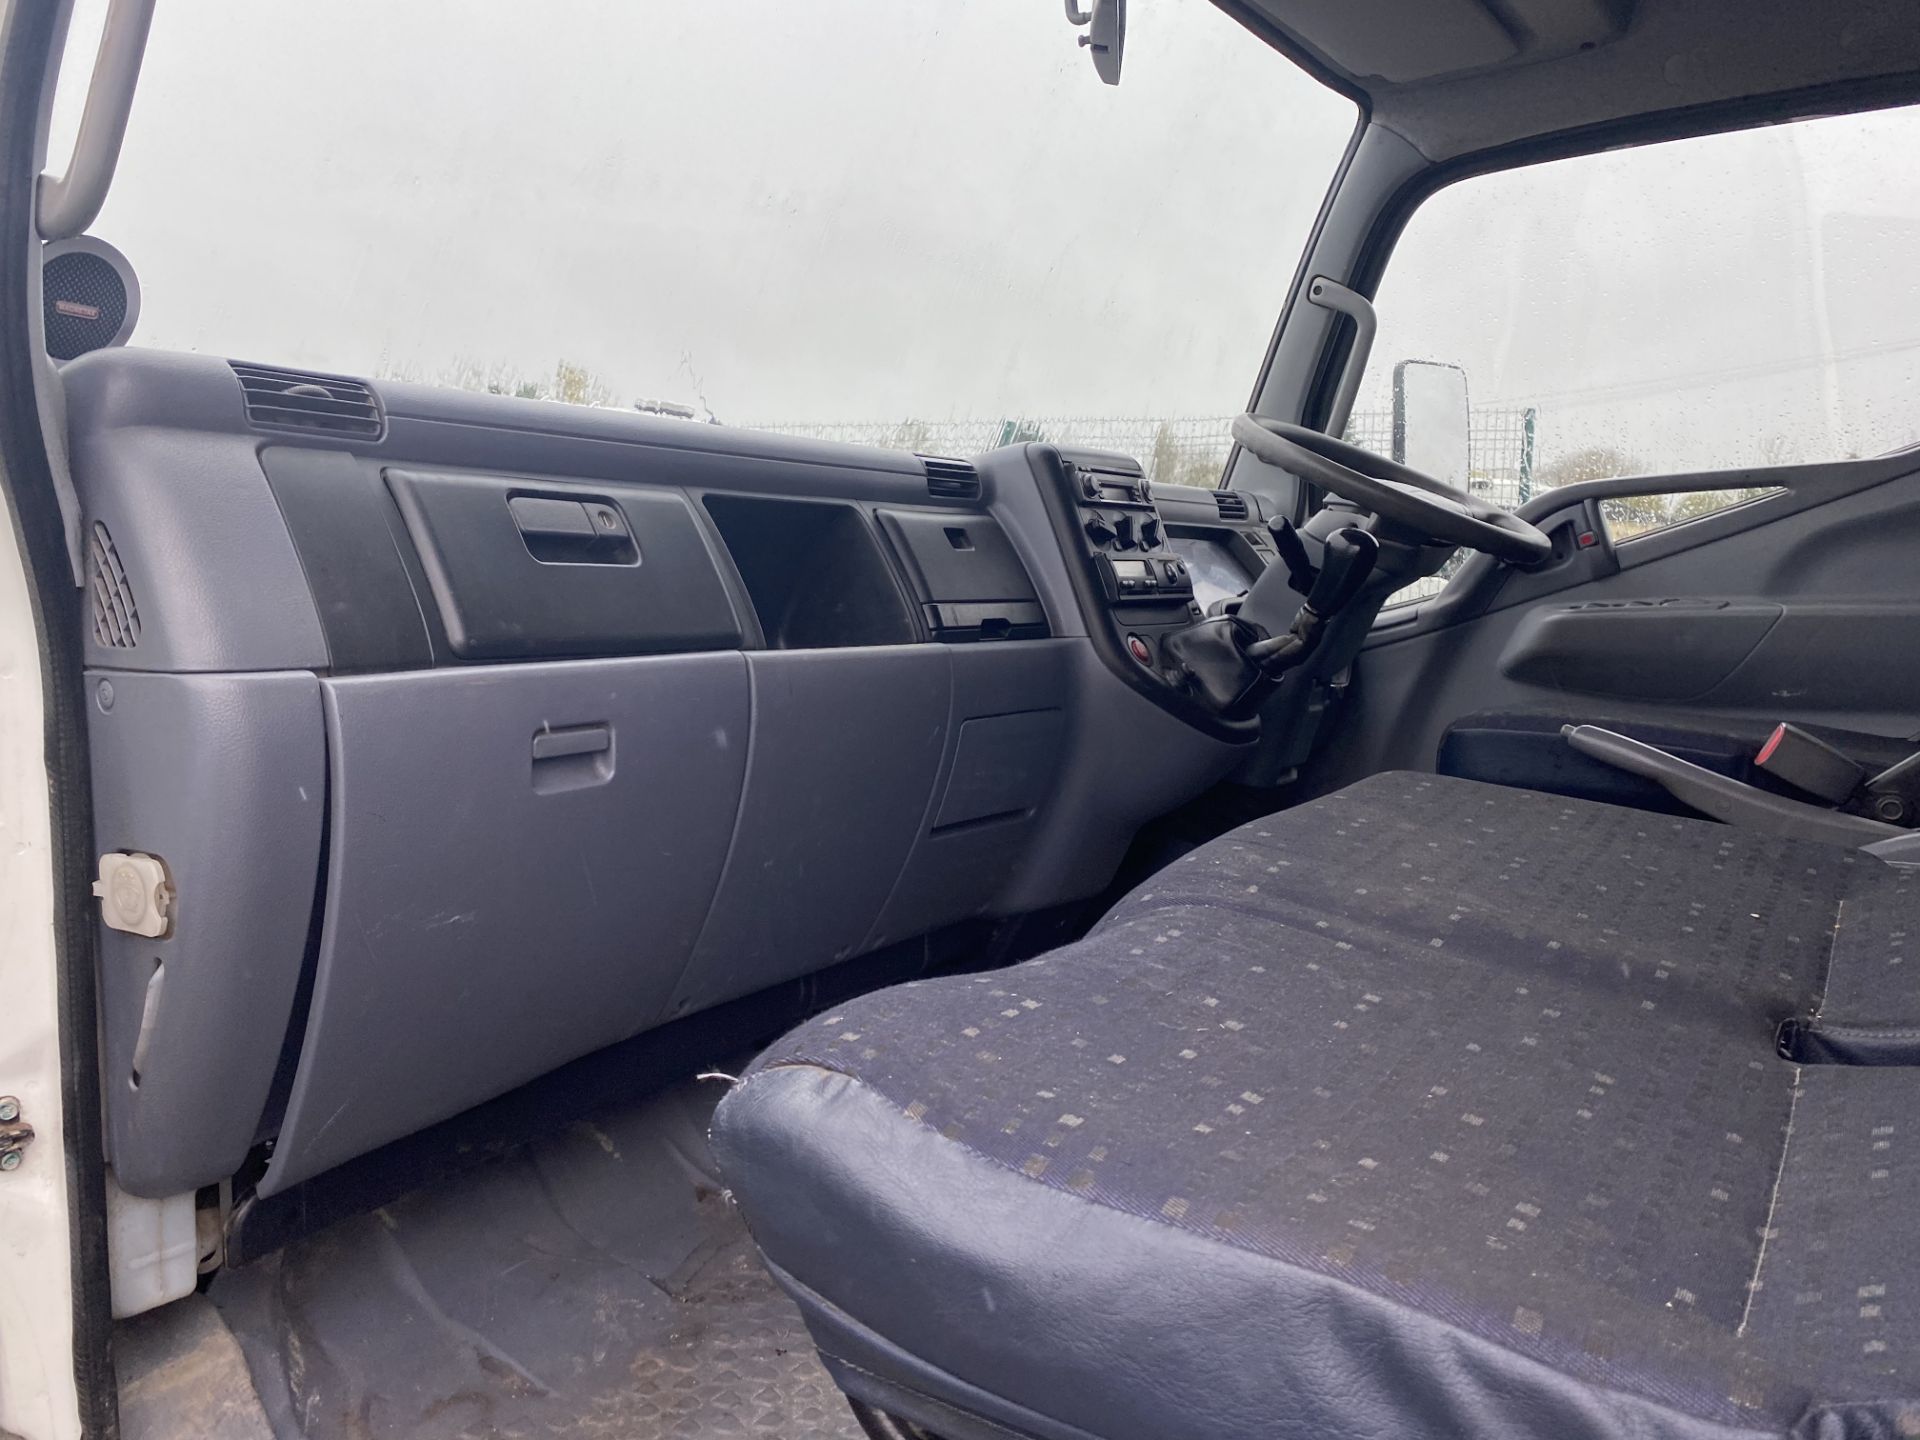 (ON SALE) MITSUBISHI CANTER 7C18 TIPPER TRUCK - 10 REG - 7500KG TIPPER - MANUAL GEARBOX - LOW MILES - Image 9 of 15